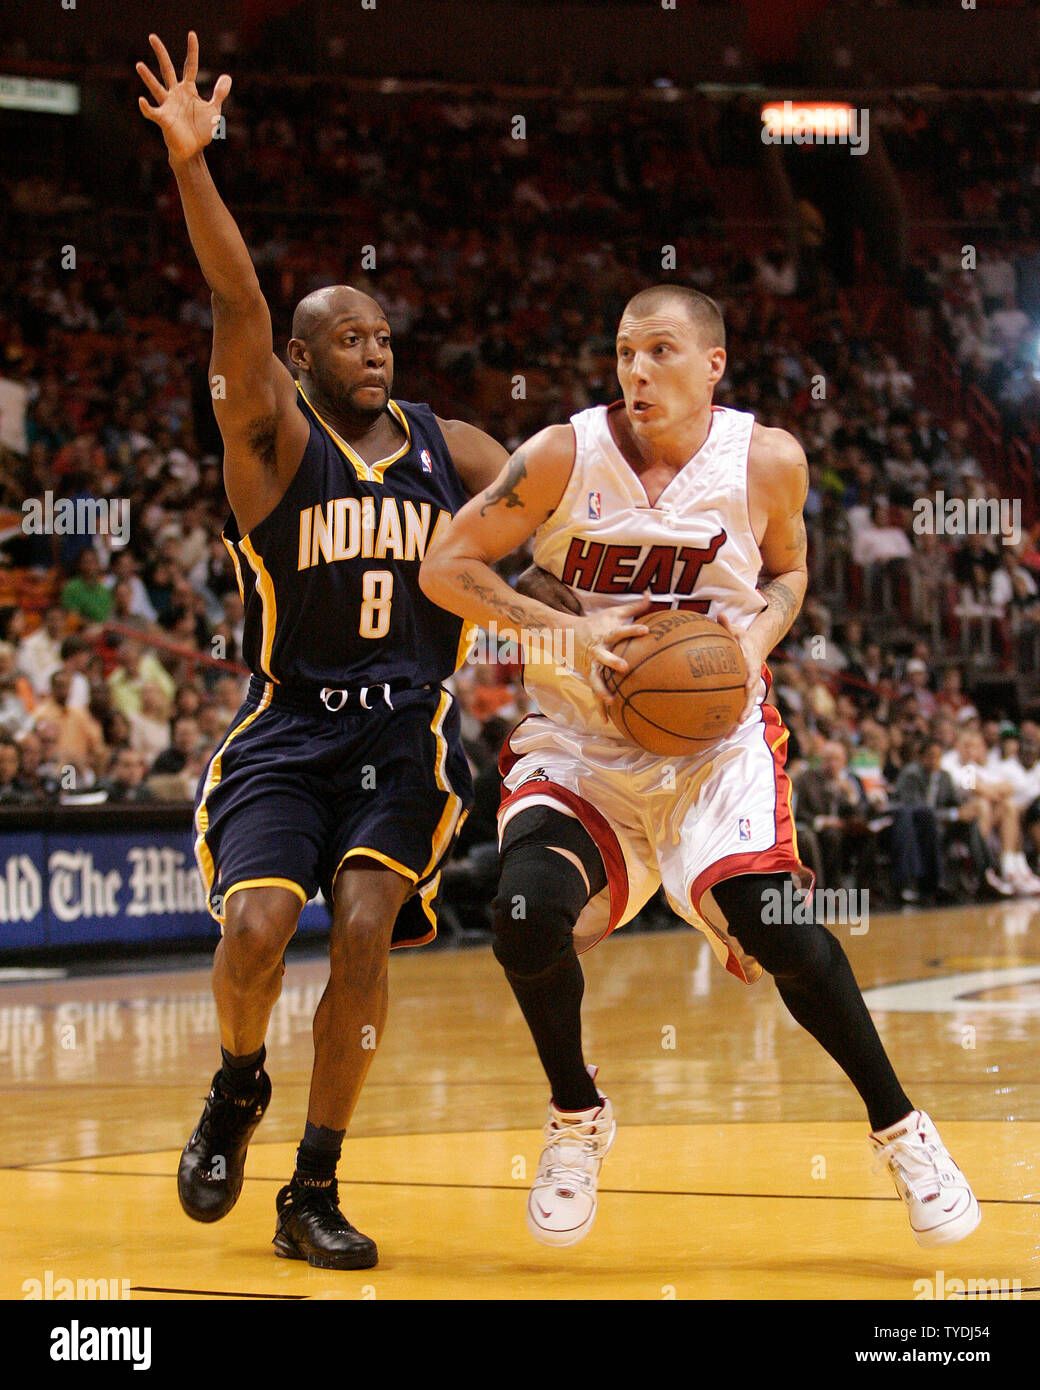 Jason Williams of the Miami Heat brings the ball up court against the  News Photo - Getty Images